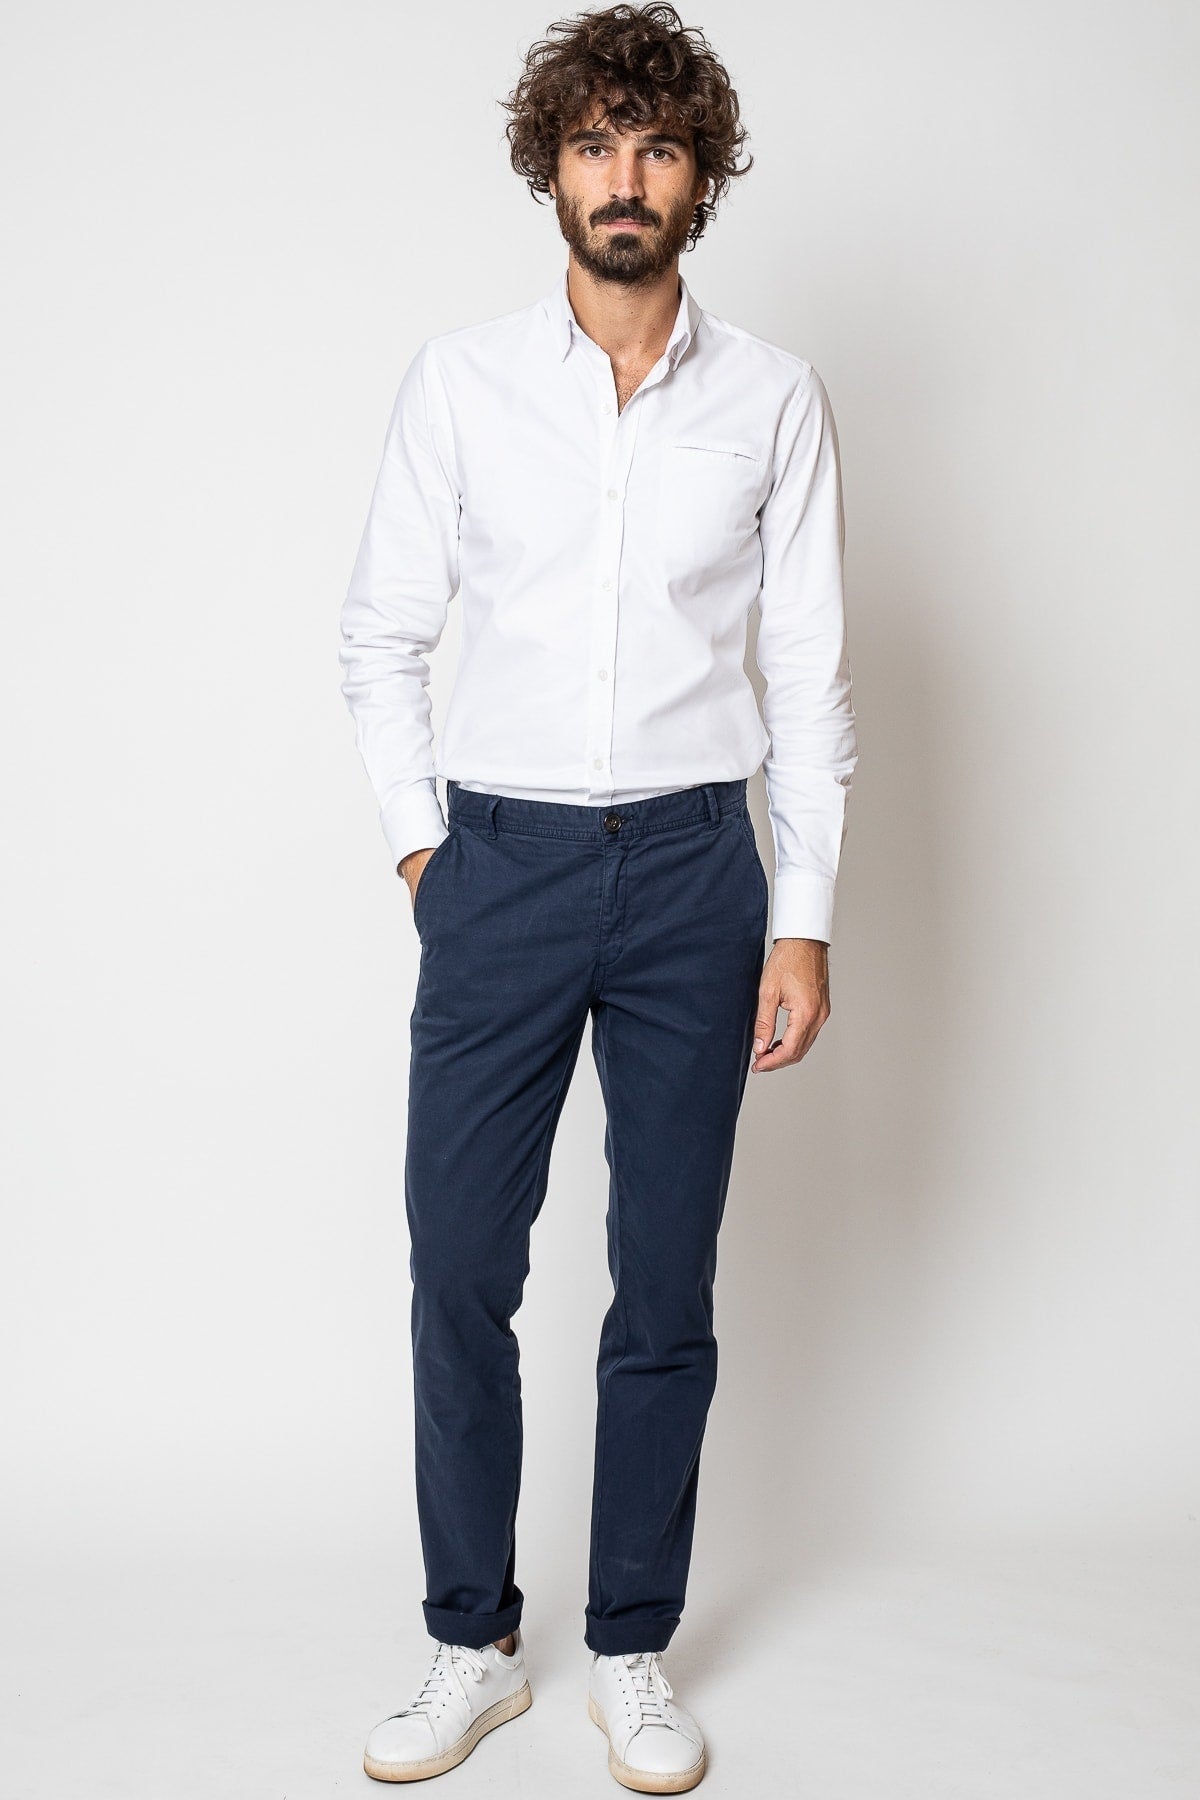 Jaqk - Navy Blue Trousers - Walter - The Good Chic